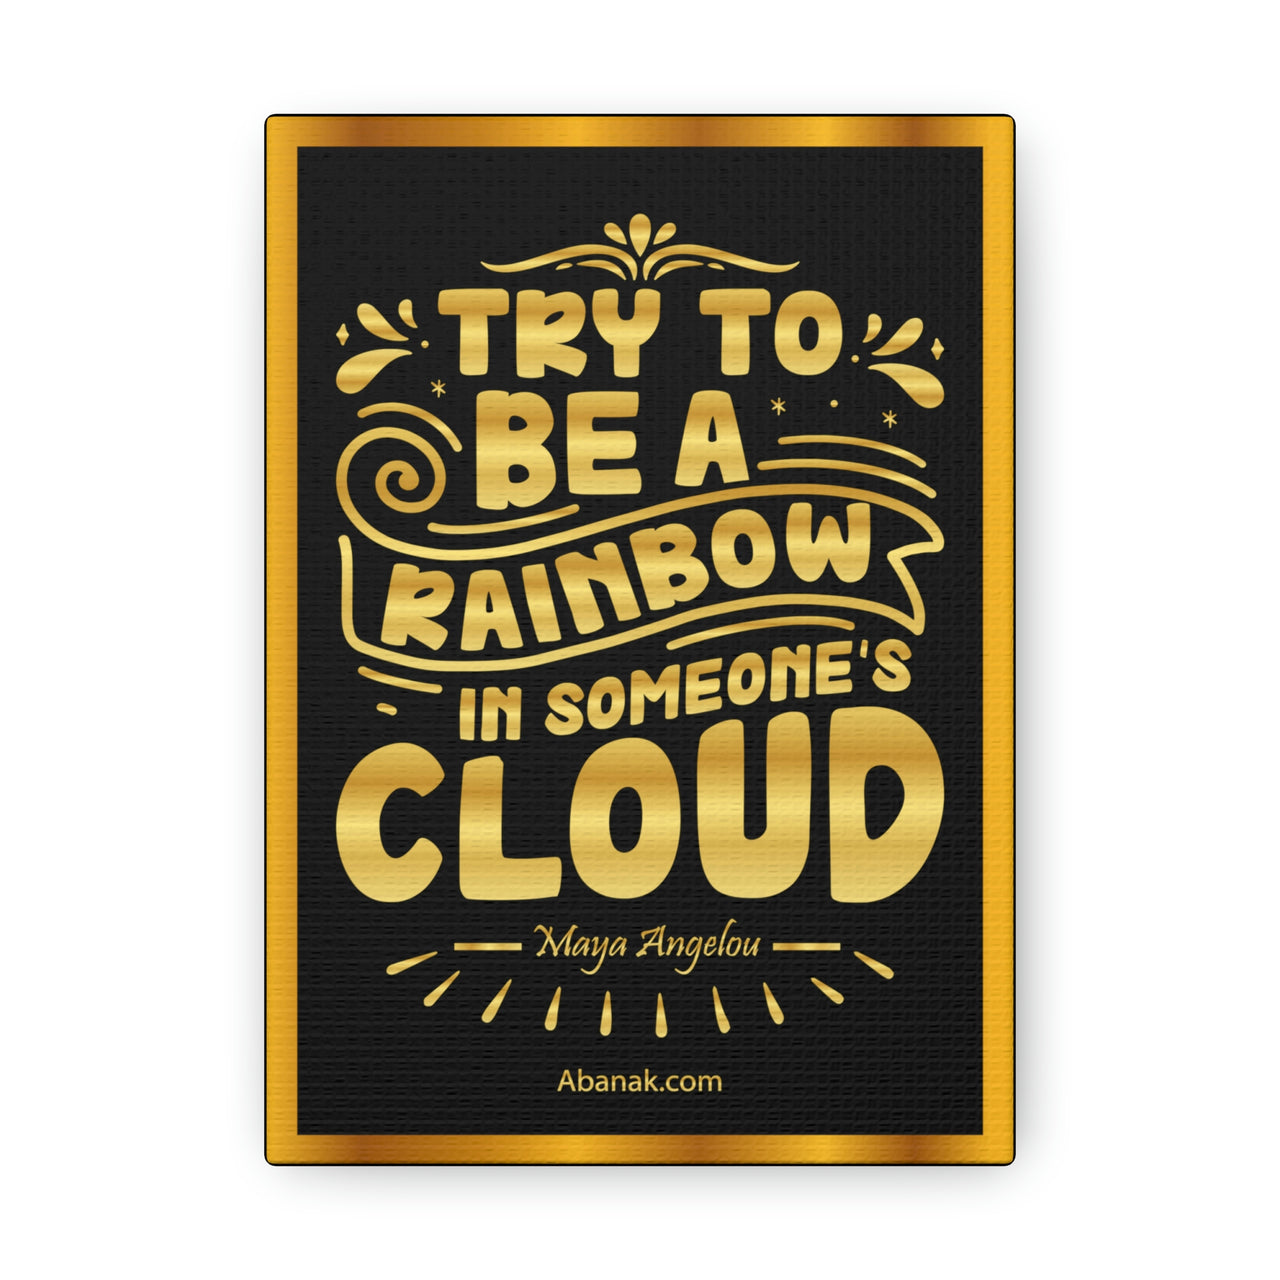 Be a Rainbow in Someone's Cloud - Maya Angelou - Gallery Wrapped Canvas Print